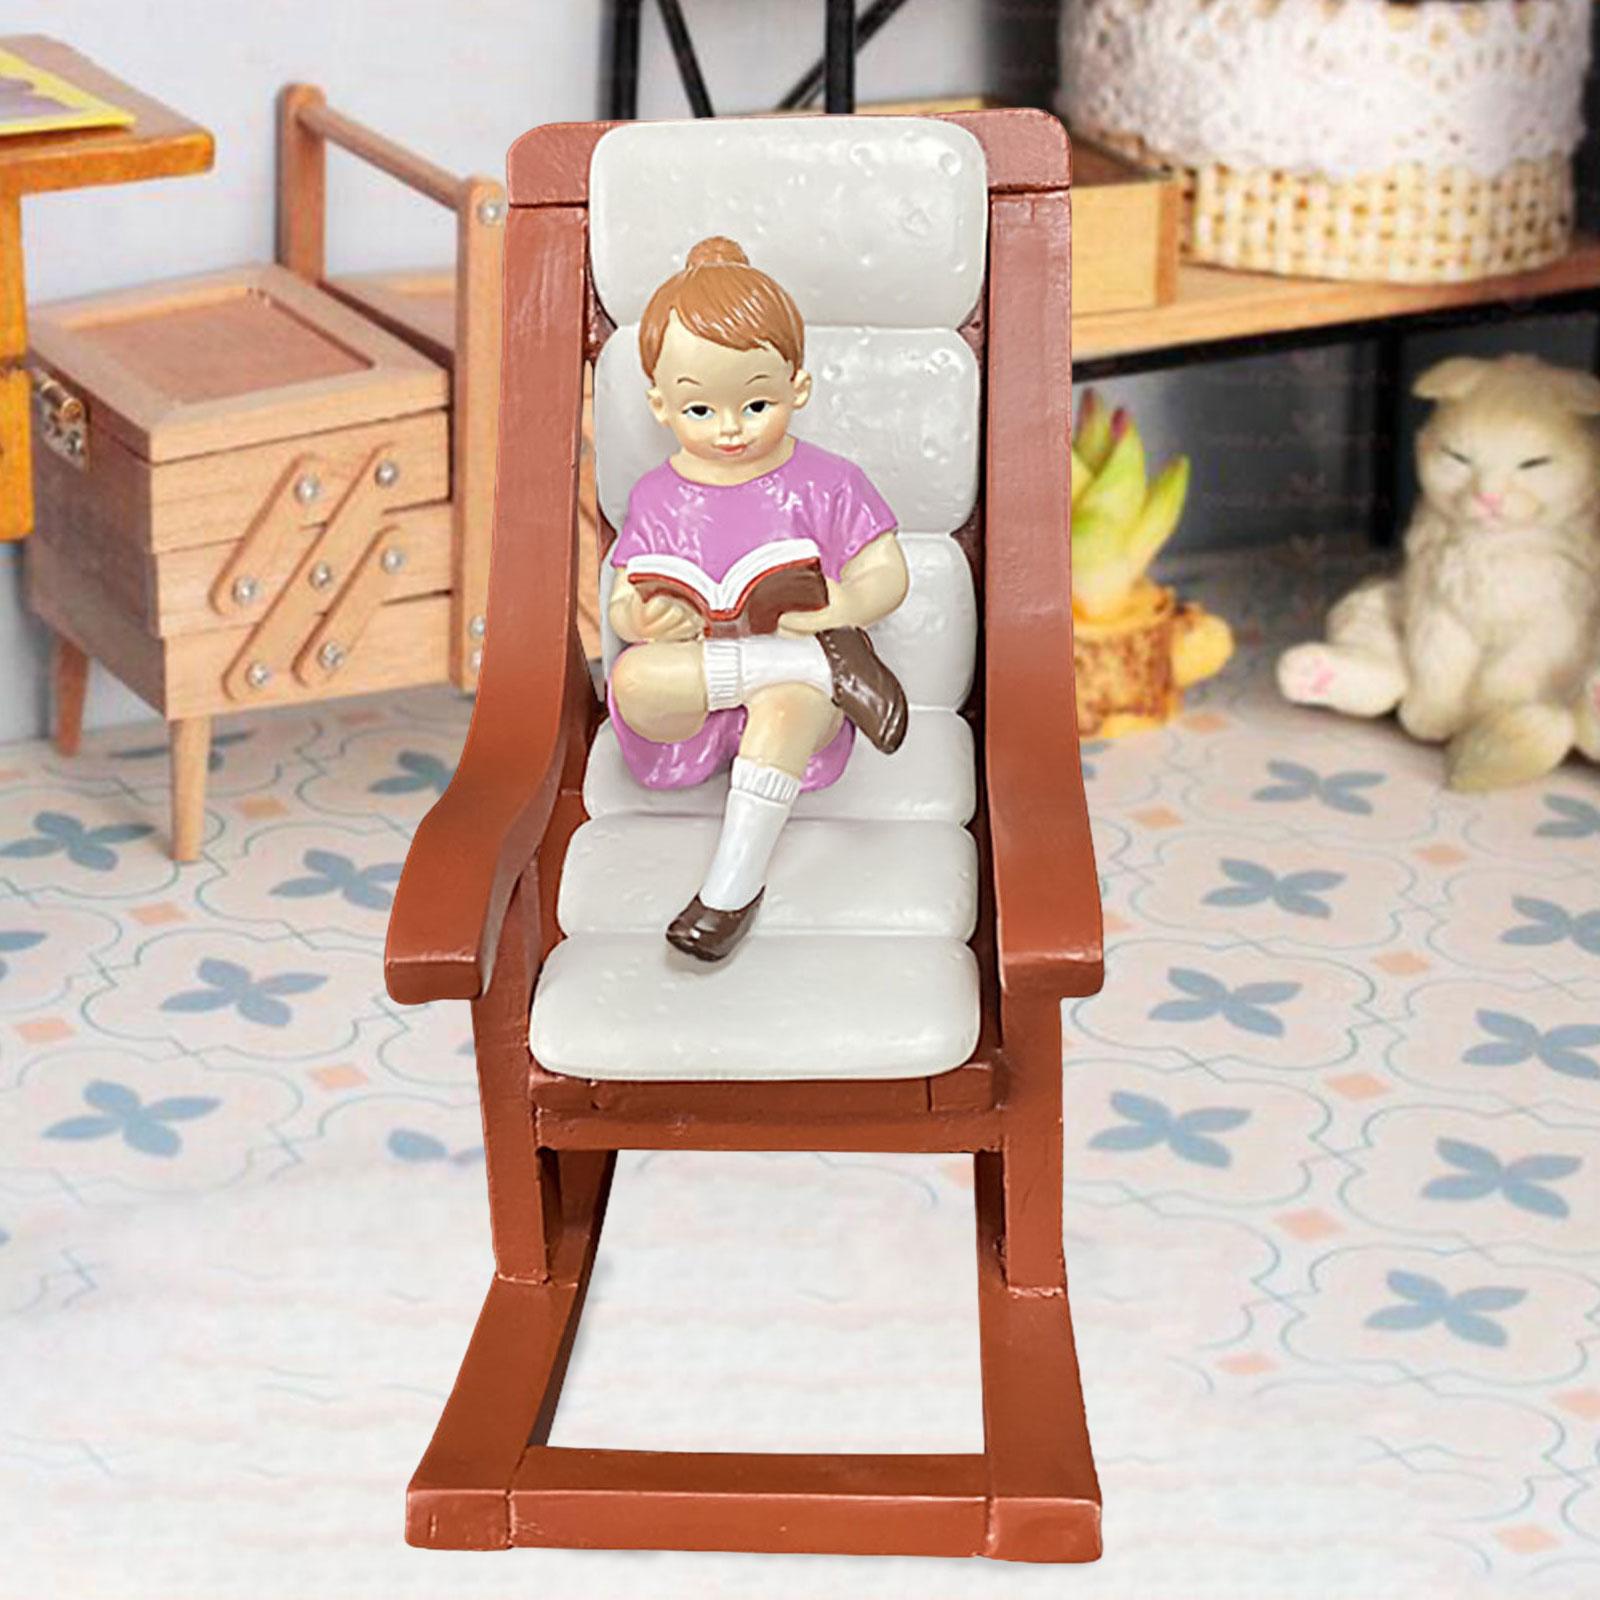 1:12 Mini Rocking Chair Accessories Toy for Photo Props Fairy Garden Bedroom Girl